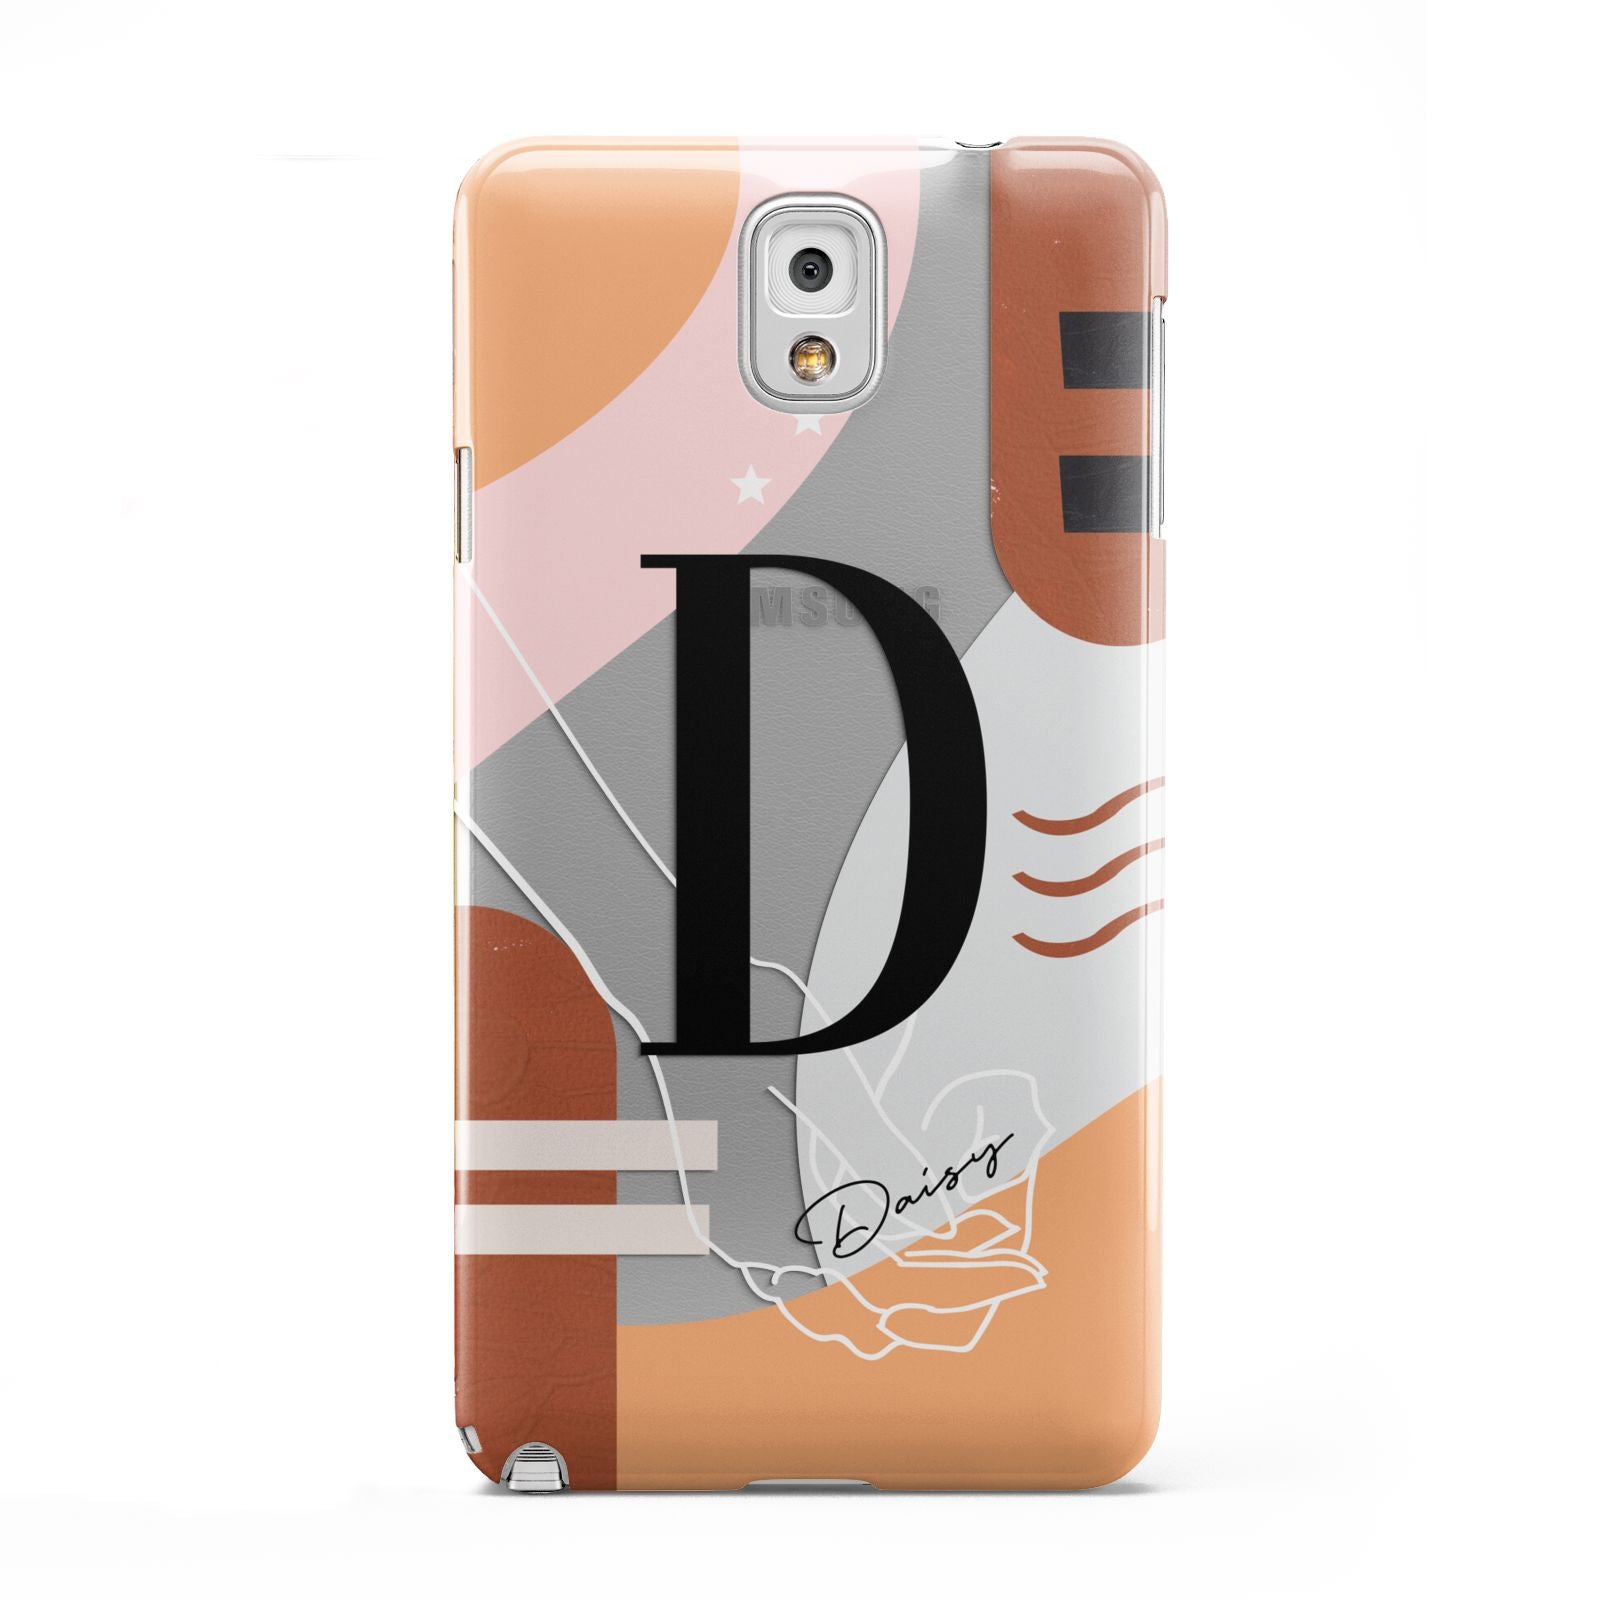 Personalised Abstract Samsung Galaxy Note 3 Case